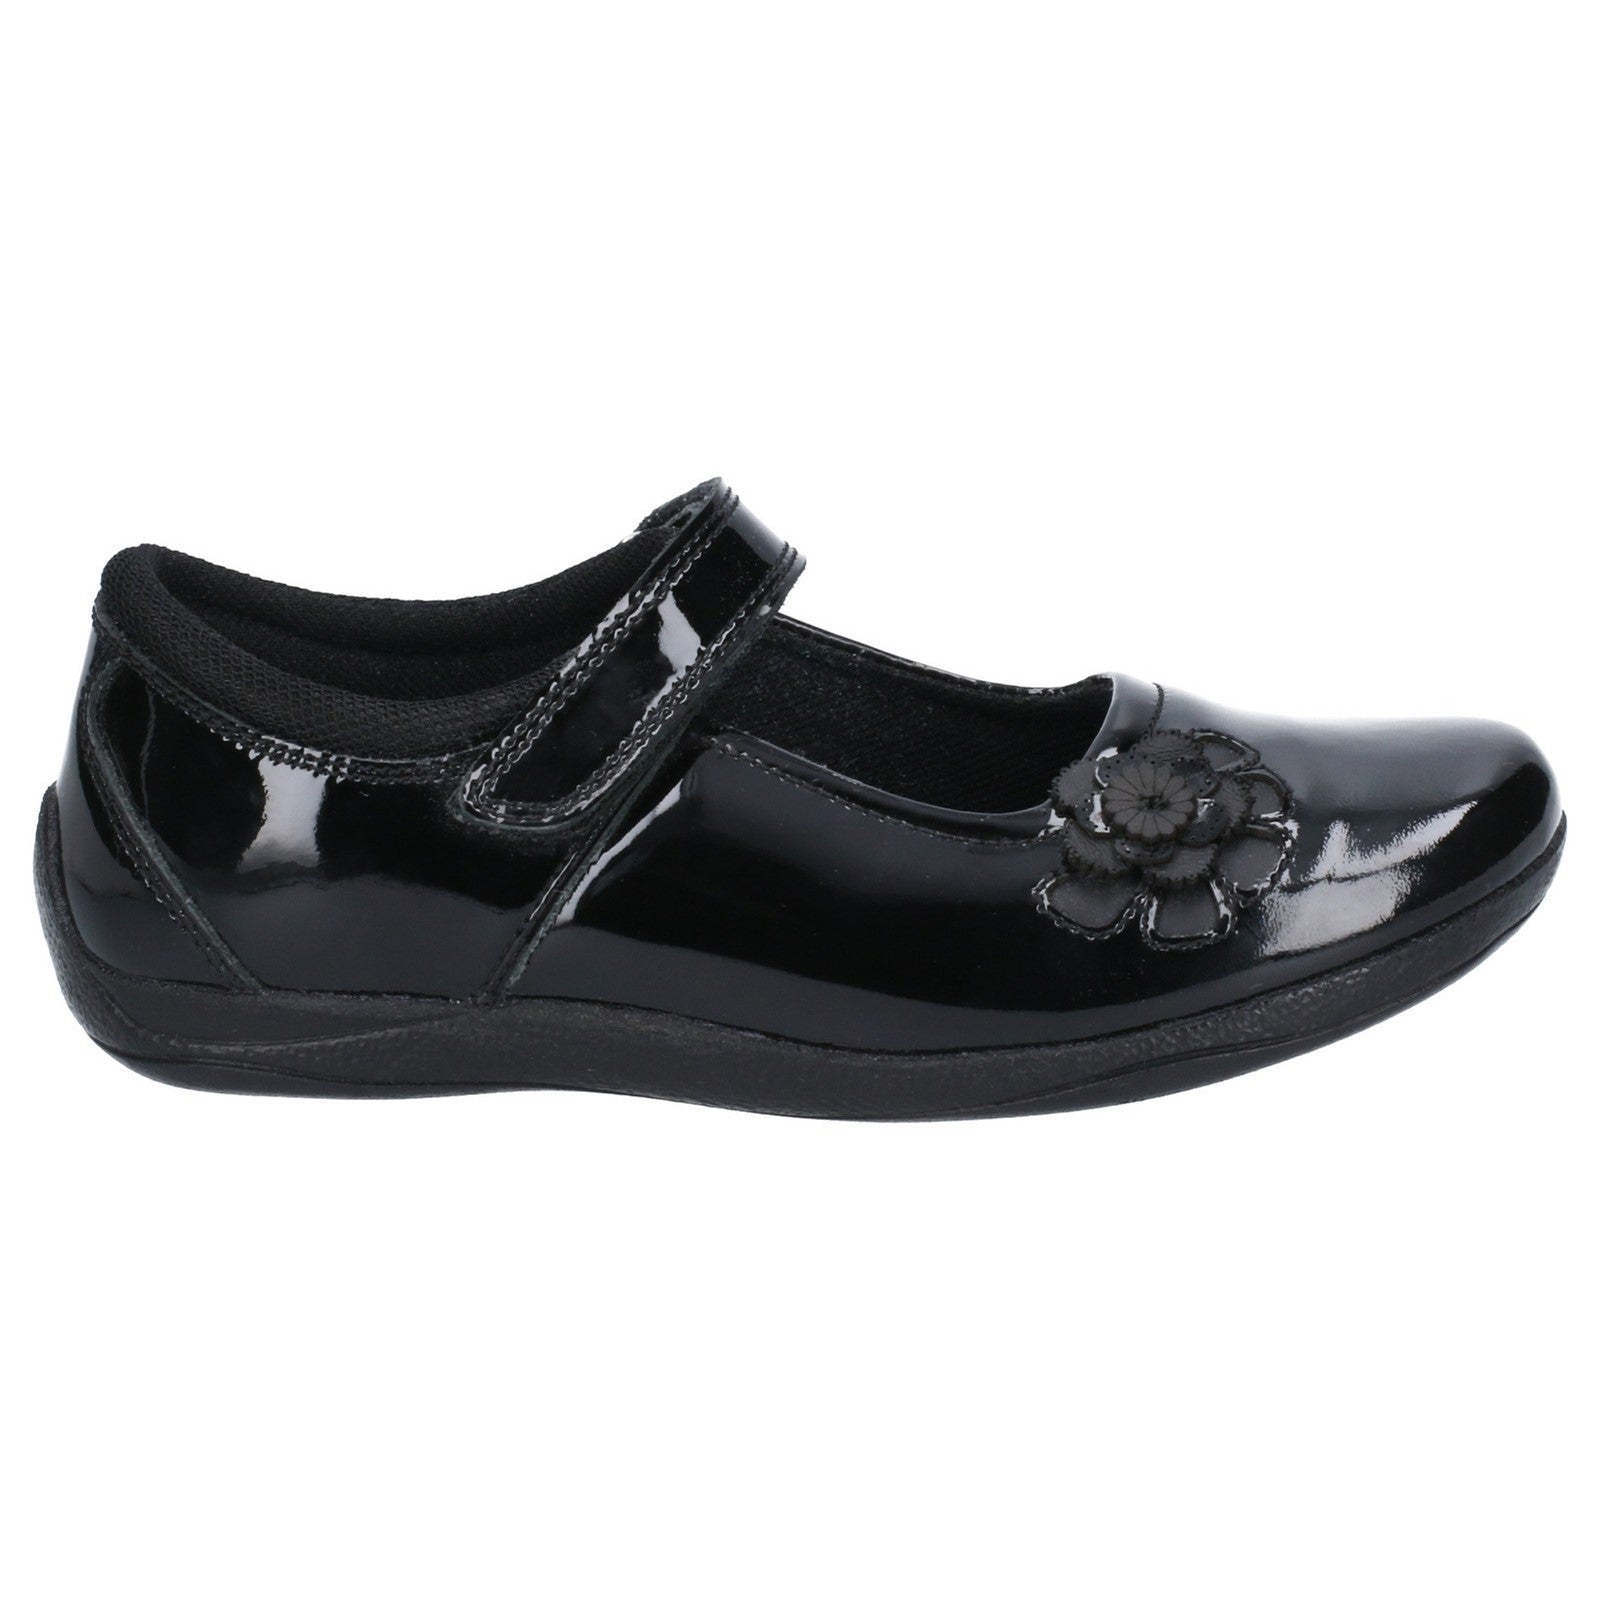 Hush Puppies Girls Jessica Patent Leather School Shoes - Black